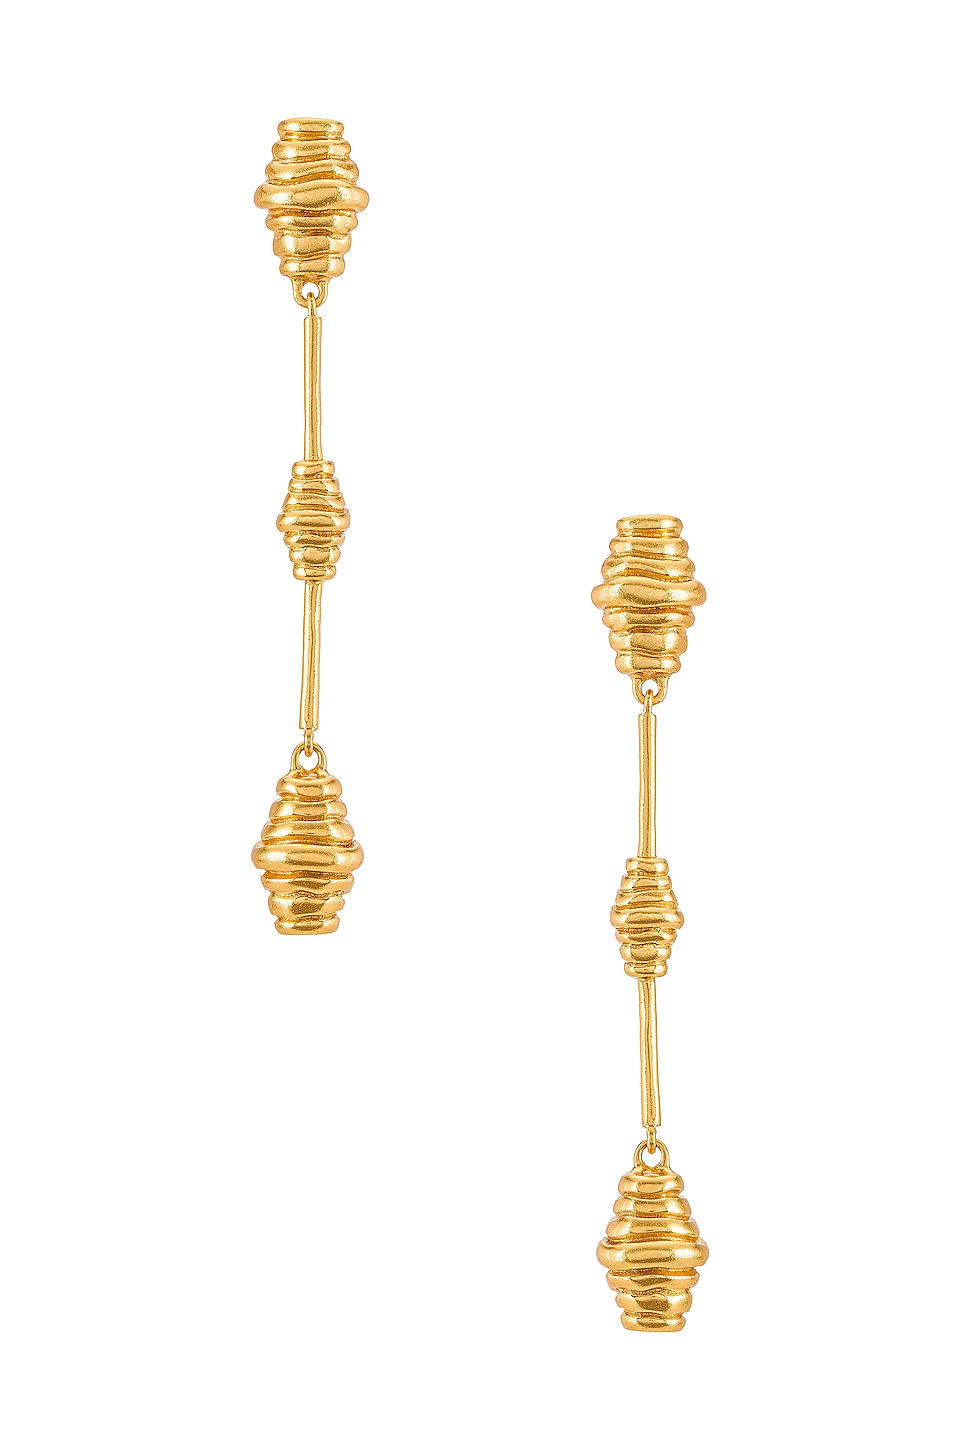 House of Harlow 1960 Honeycomb Drop Earrings in Gold